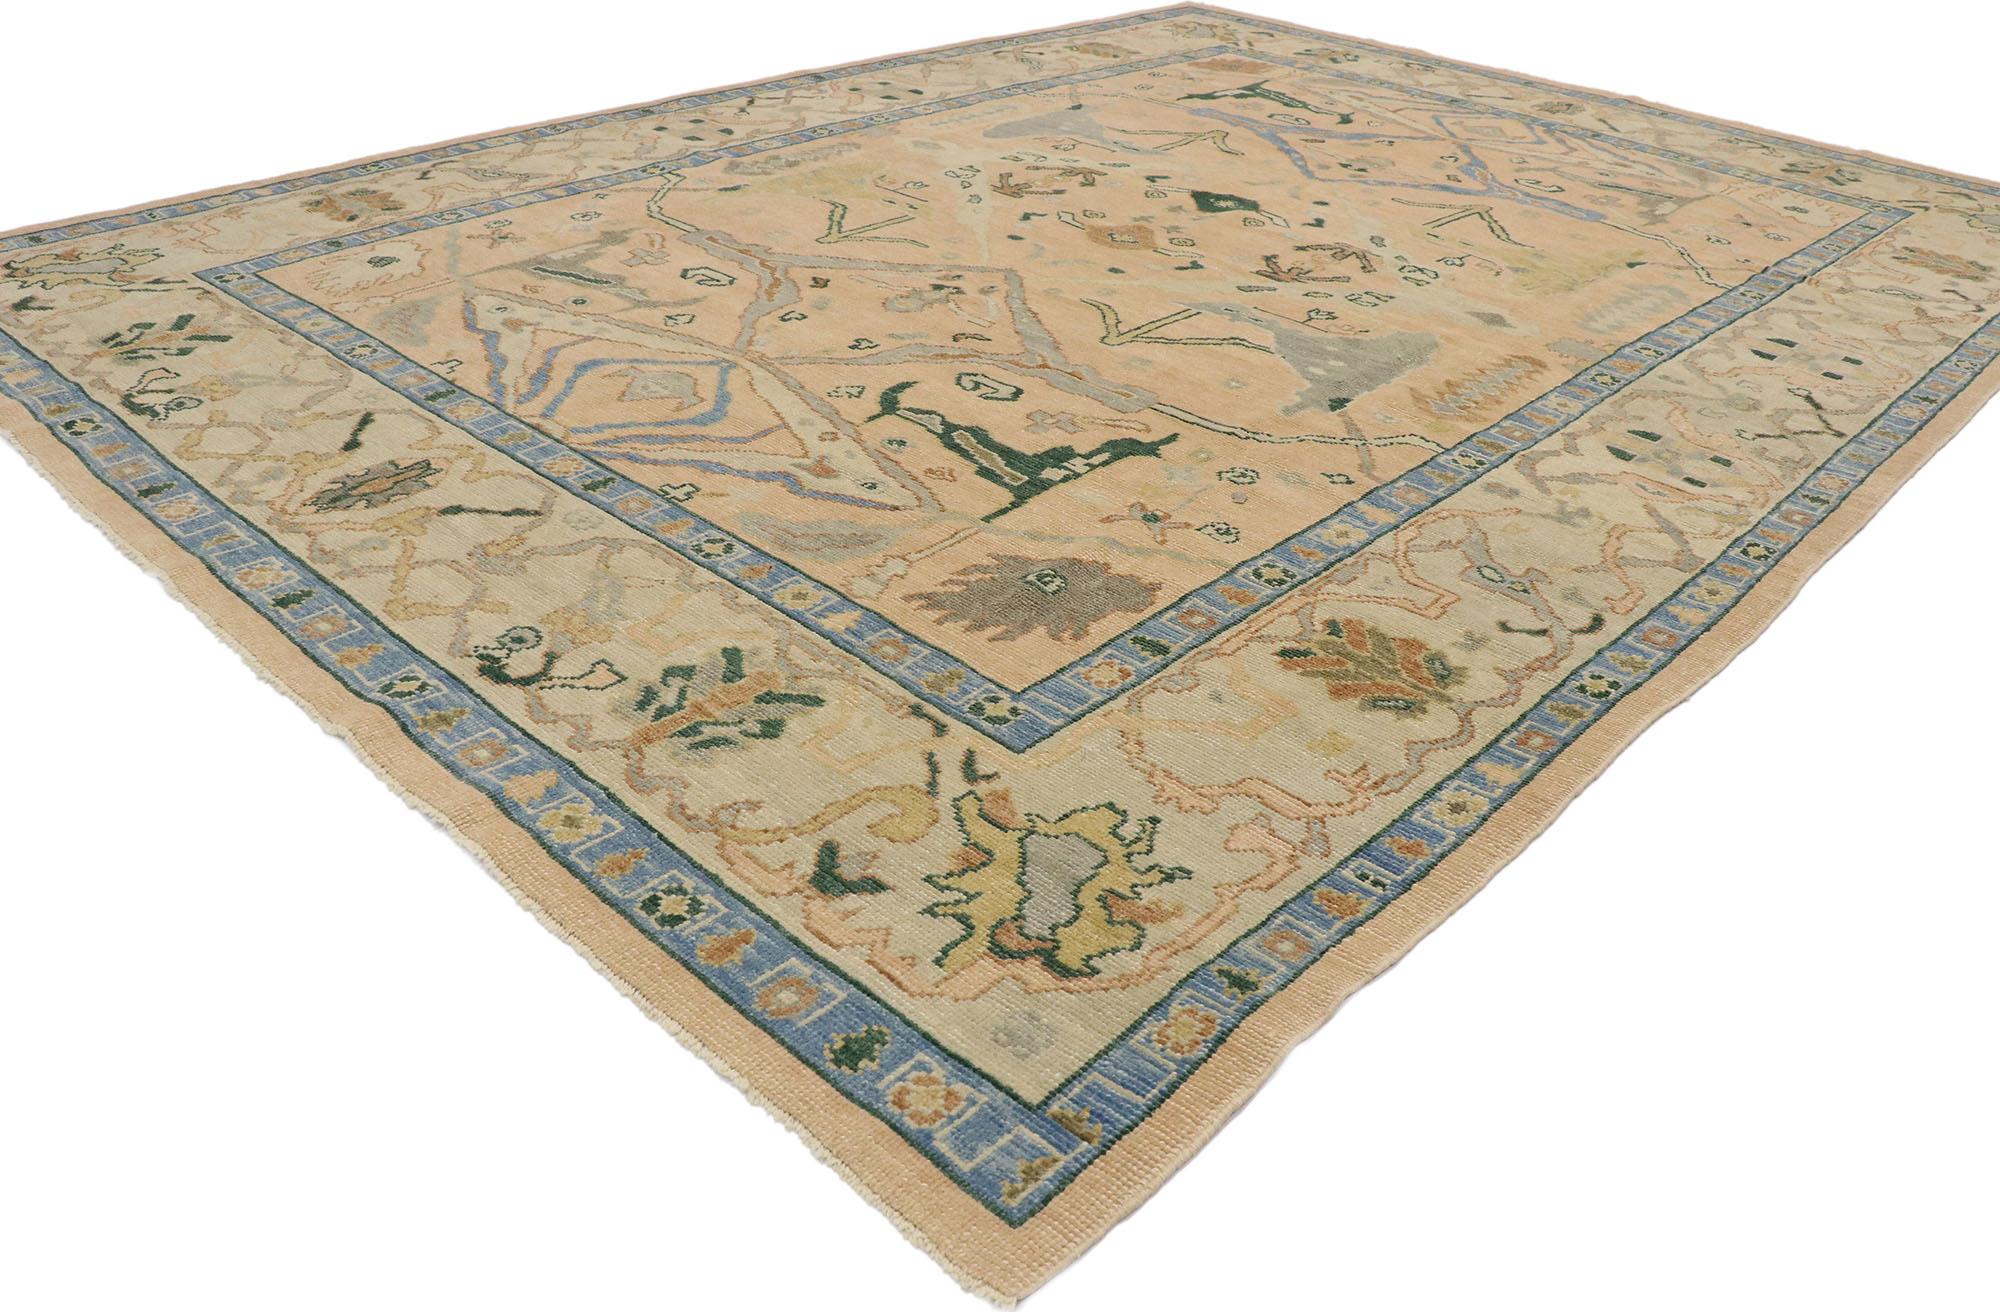 53382, new contemporary Turkish Oushak rug with Arts & Crafts style. This hand knotted wool new contemporary Turkish Oushak rug features an all-over geometric botanical pattern spread across an abrashed field. The vibrant field pattern is comprised